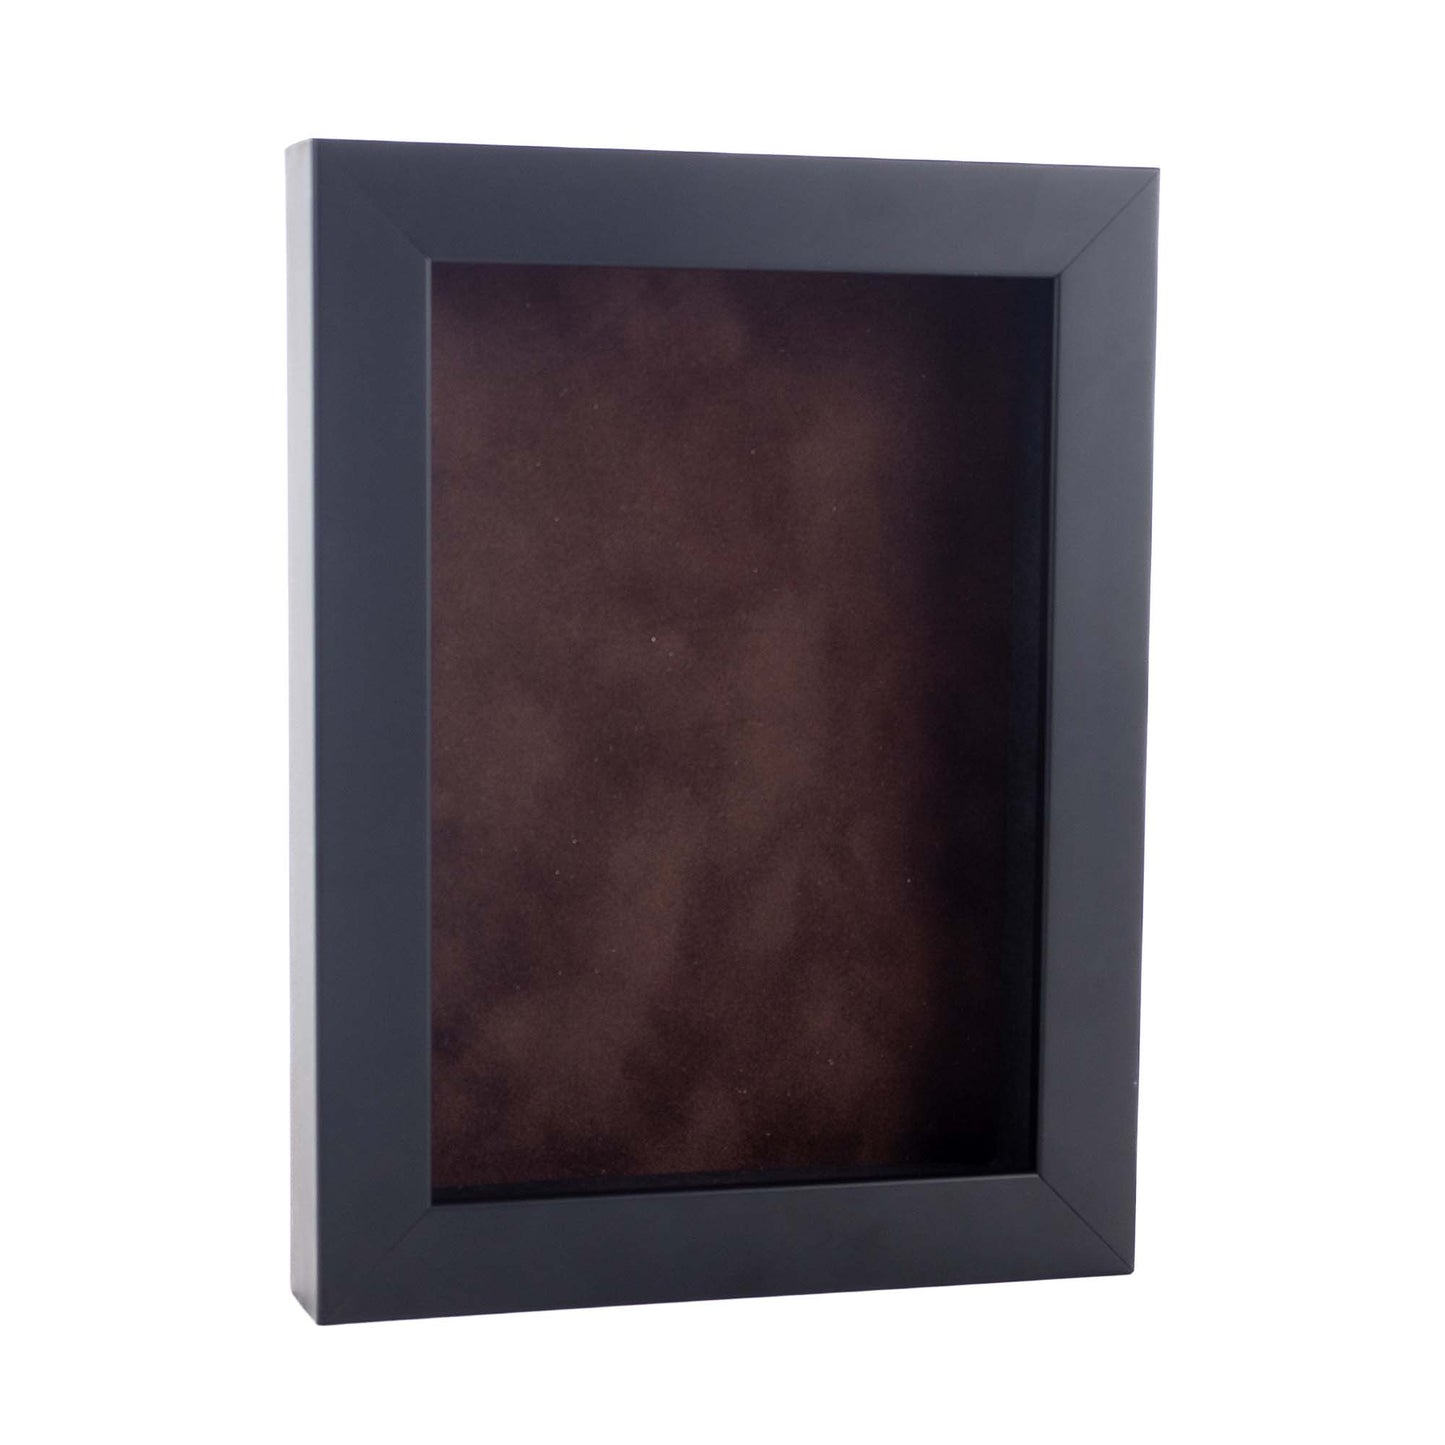 Black Shadow Box Frame With Brown Acid-Free Suede Backing